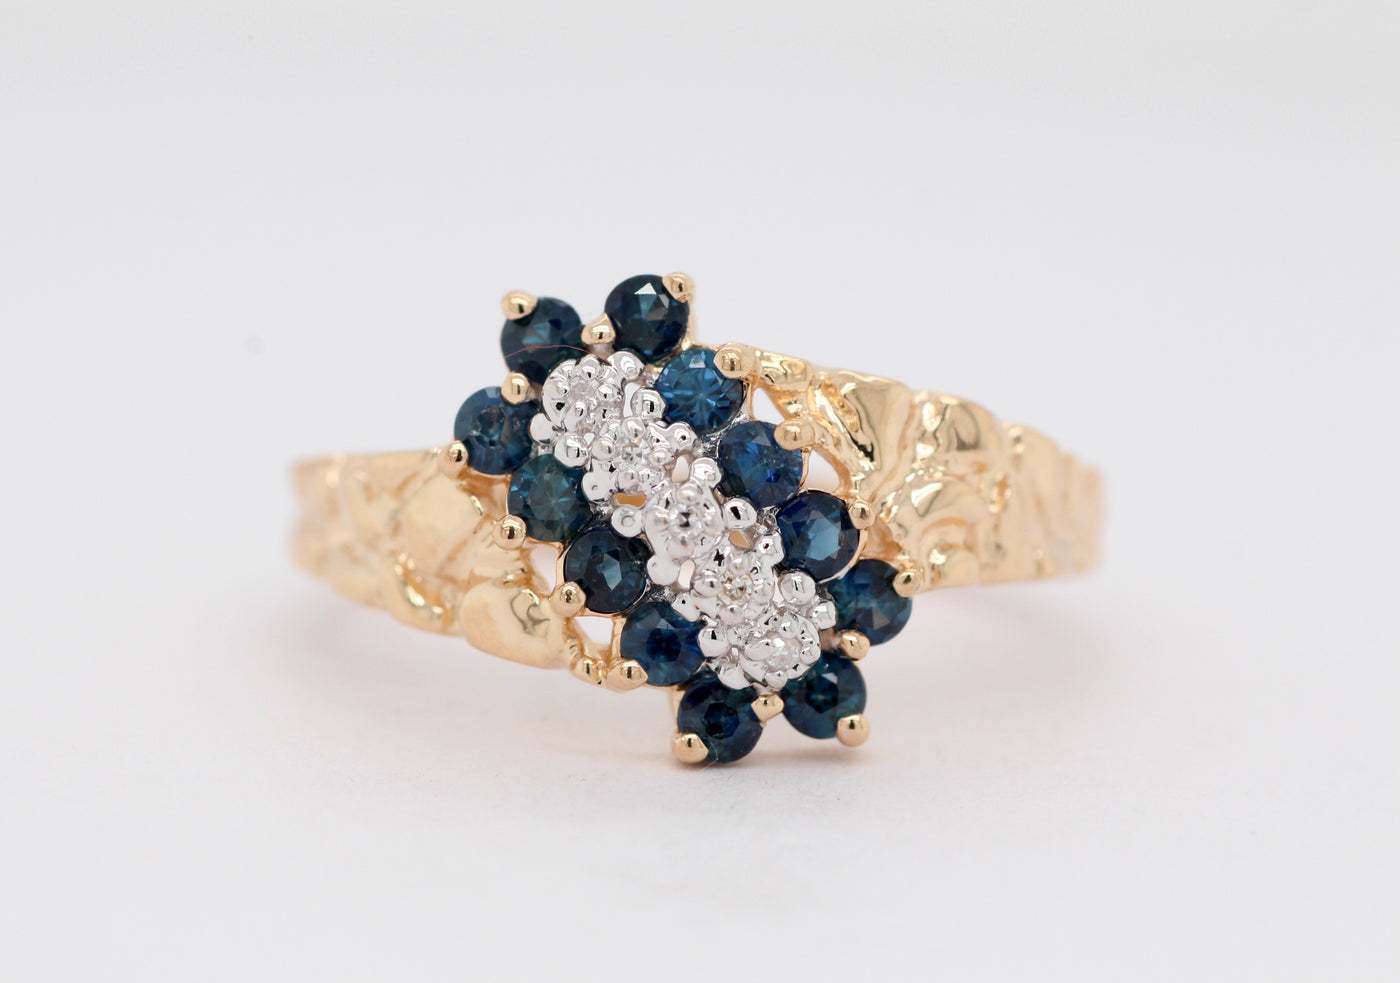 ESTATE 14KY .41 CTTW SAPPHIRE AND DIAMOND RING, .03 CTTW H-SI2